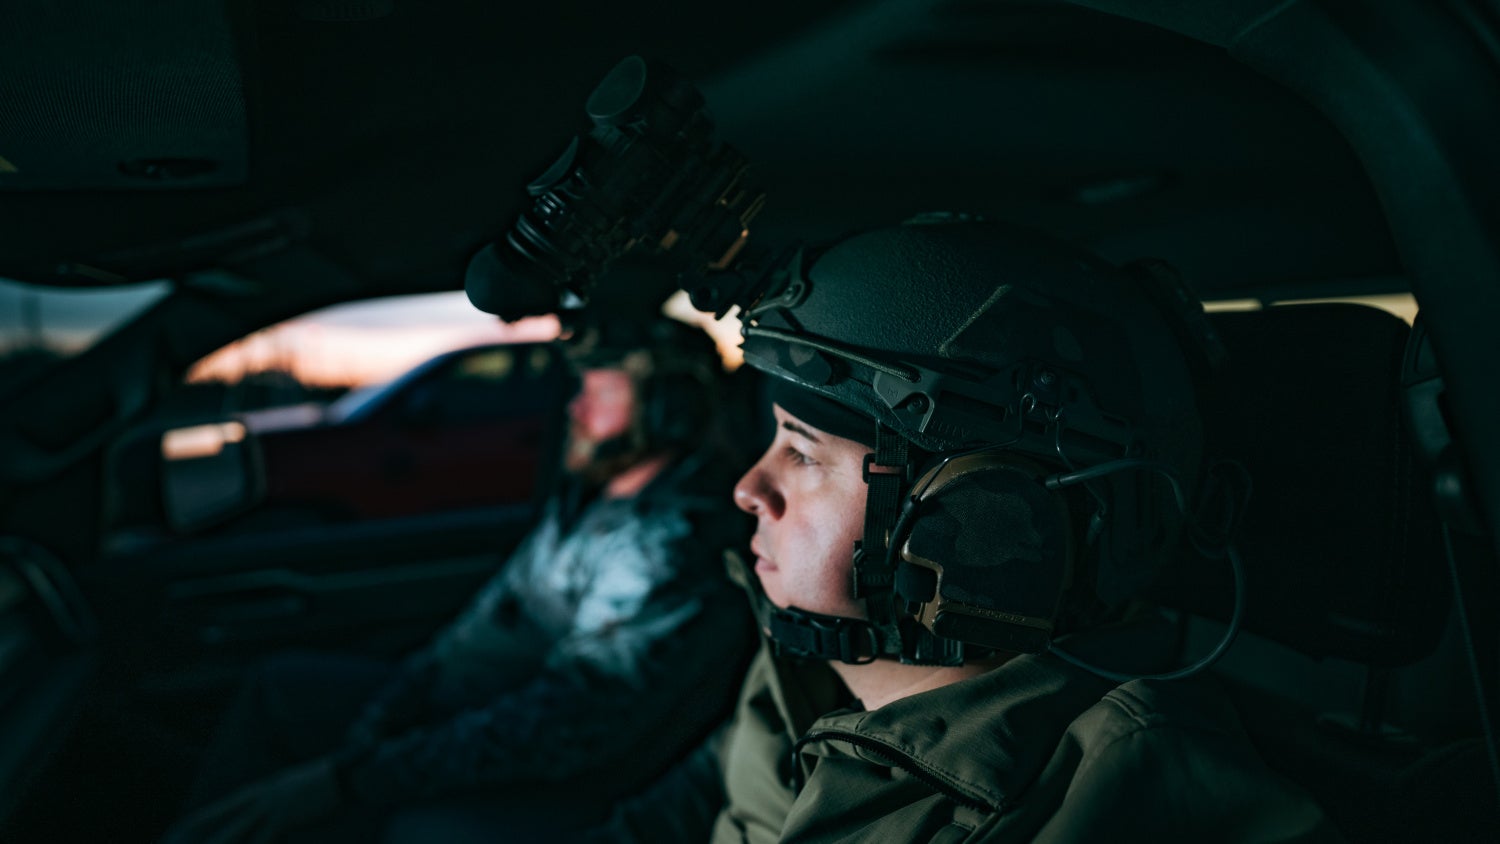 HHV Launches the American-Made ATE_Lite Ballistic Helmet